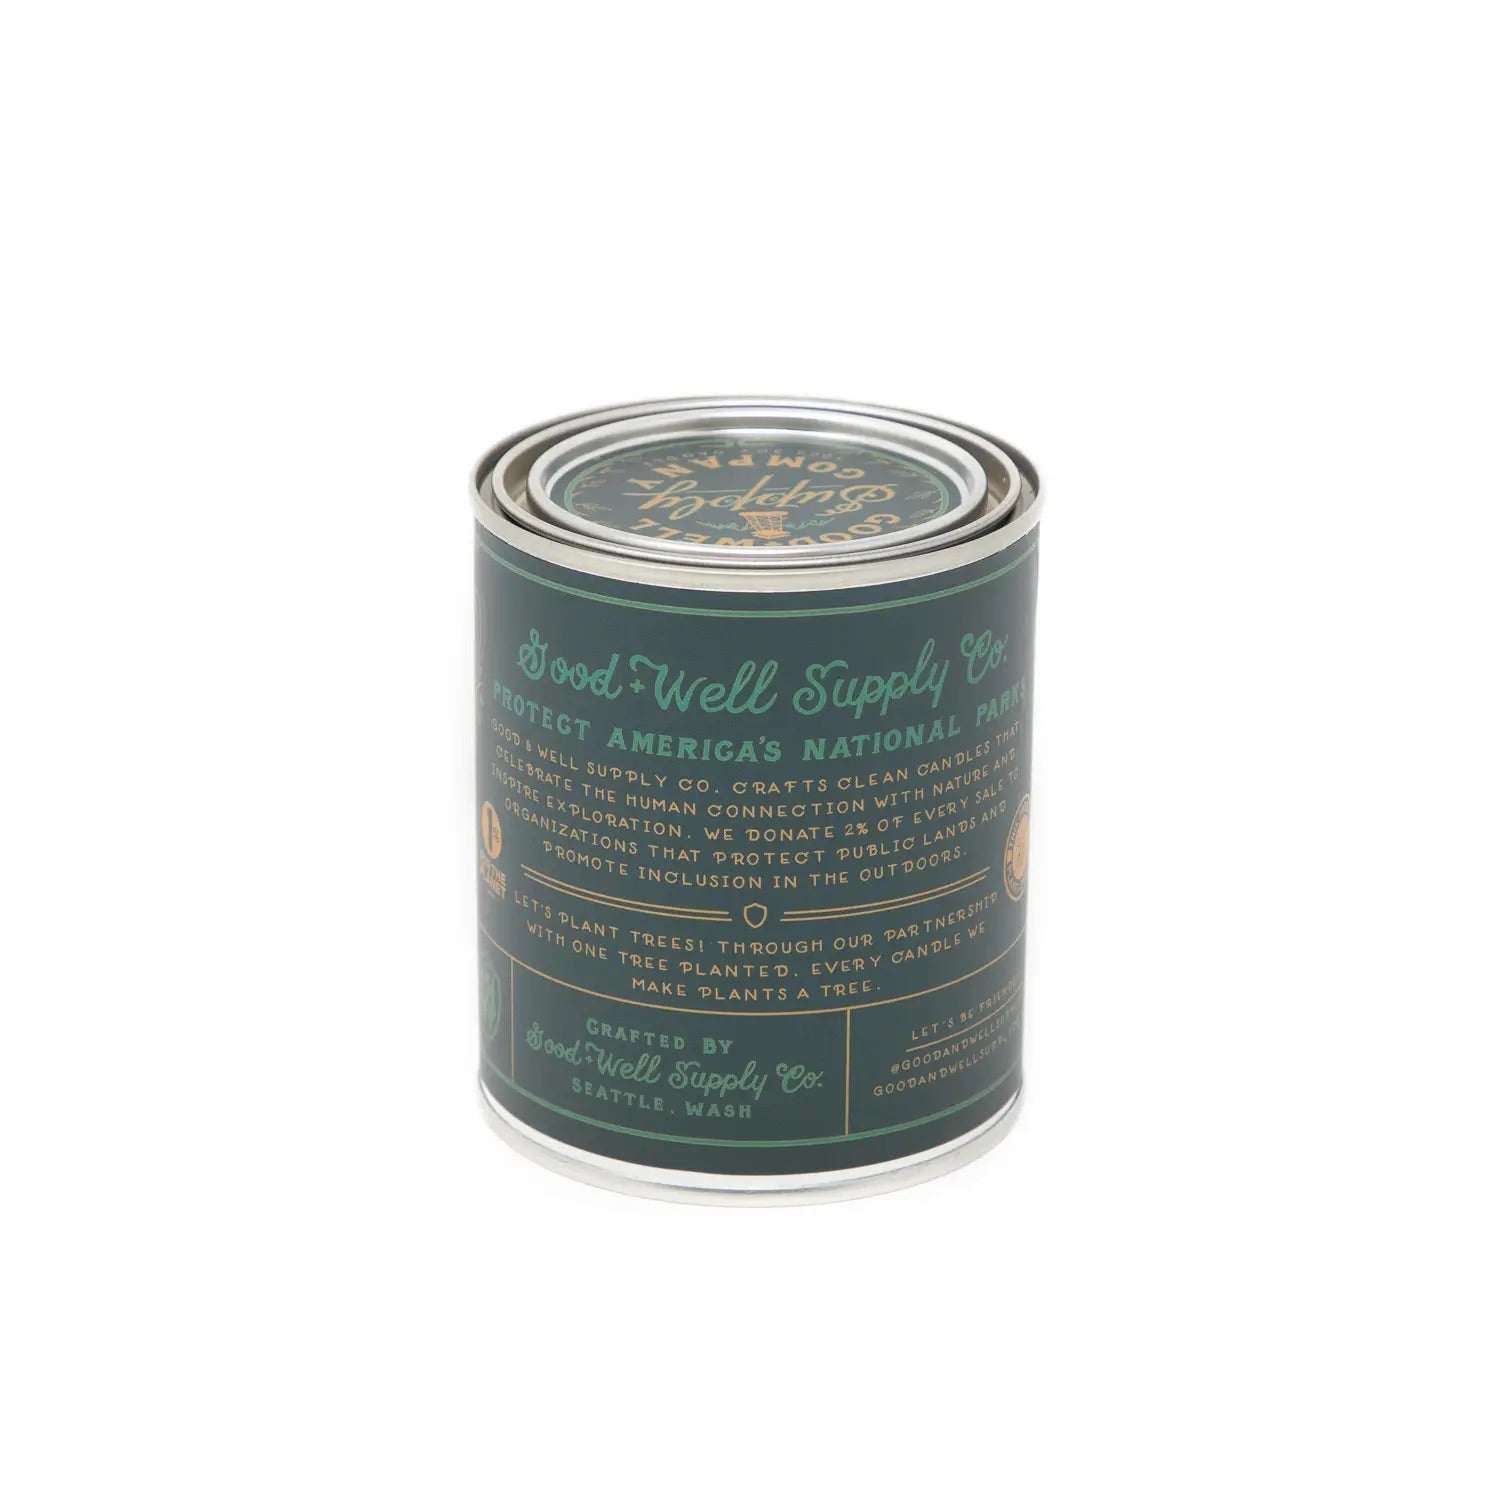 North Cascades National Park Candle 1/2 Pint - Notes of Peppermint, Rosemary & Cardamom